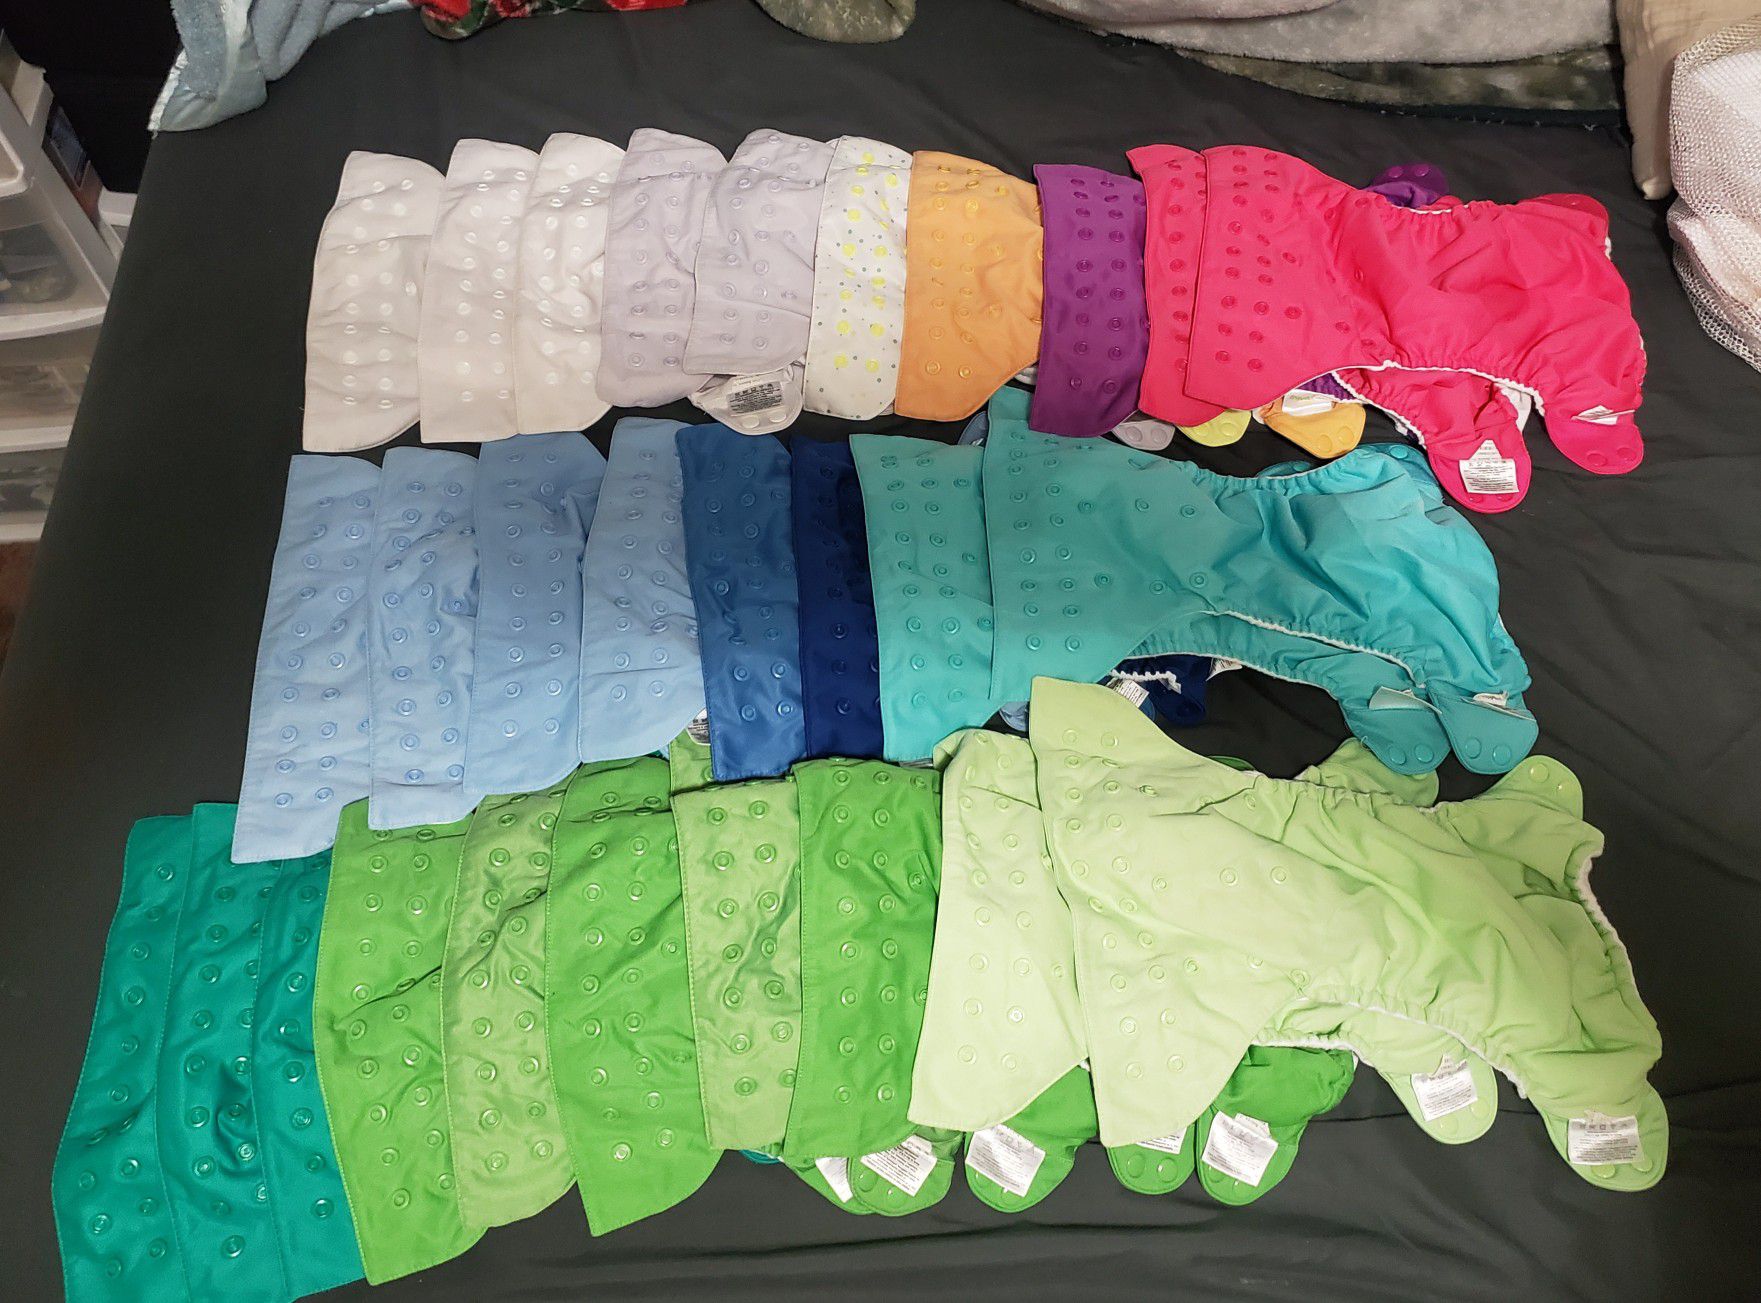 bumGenius 4.0 and Freestyle lot 31 diapers total